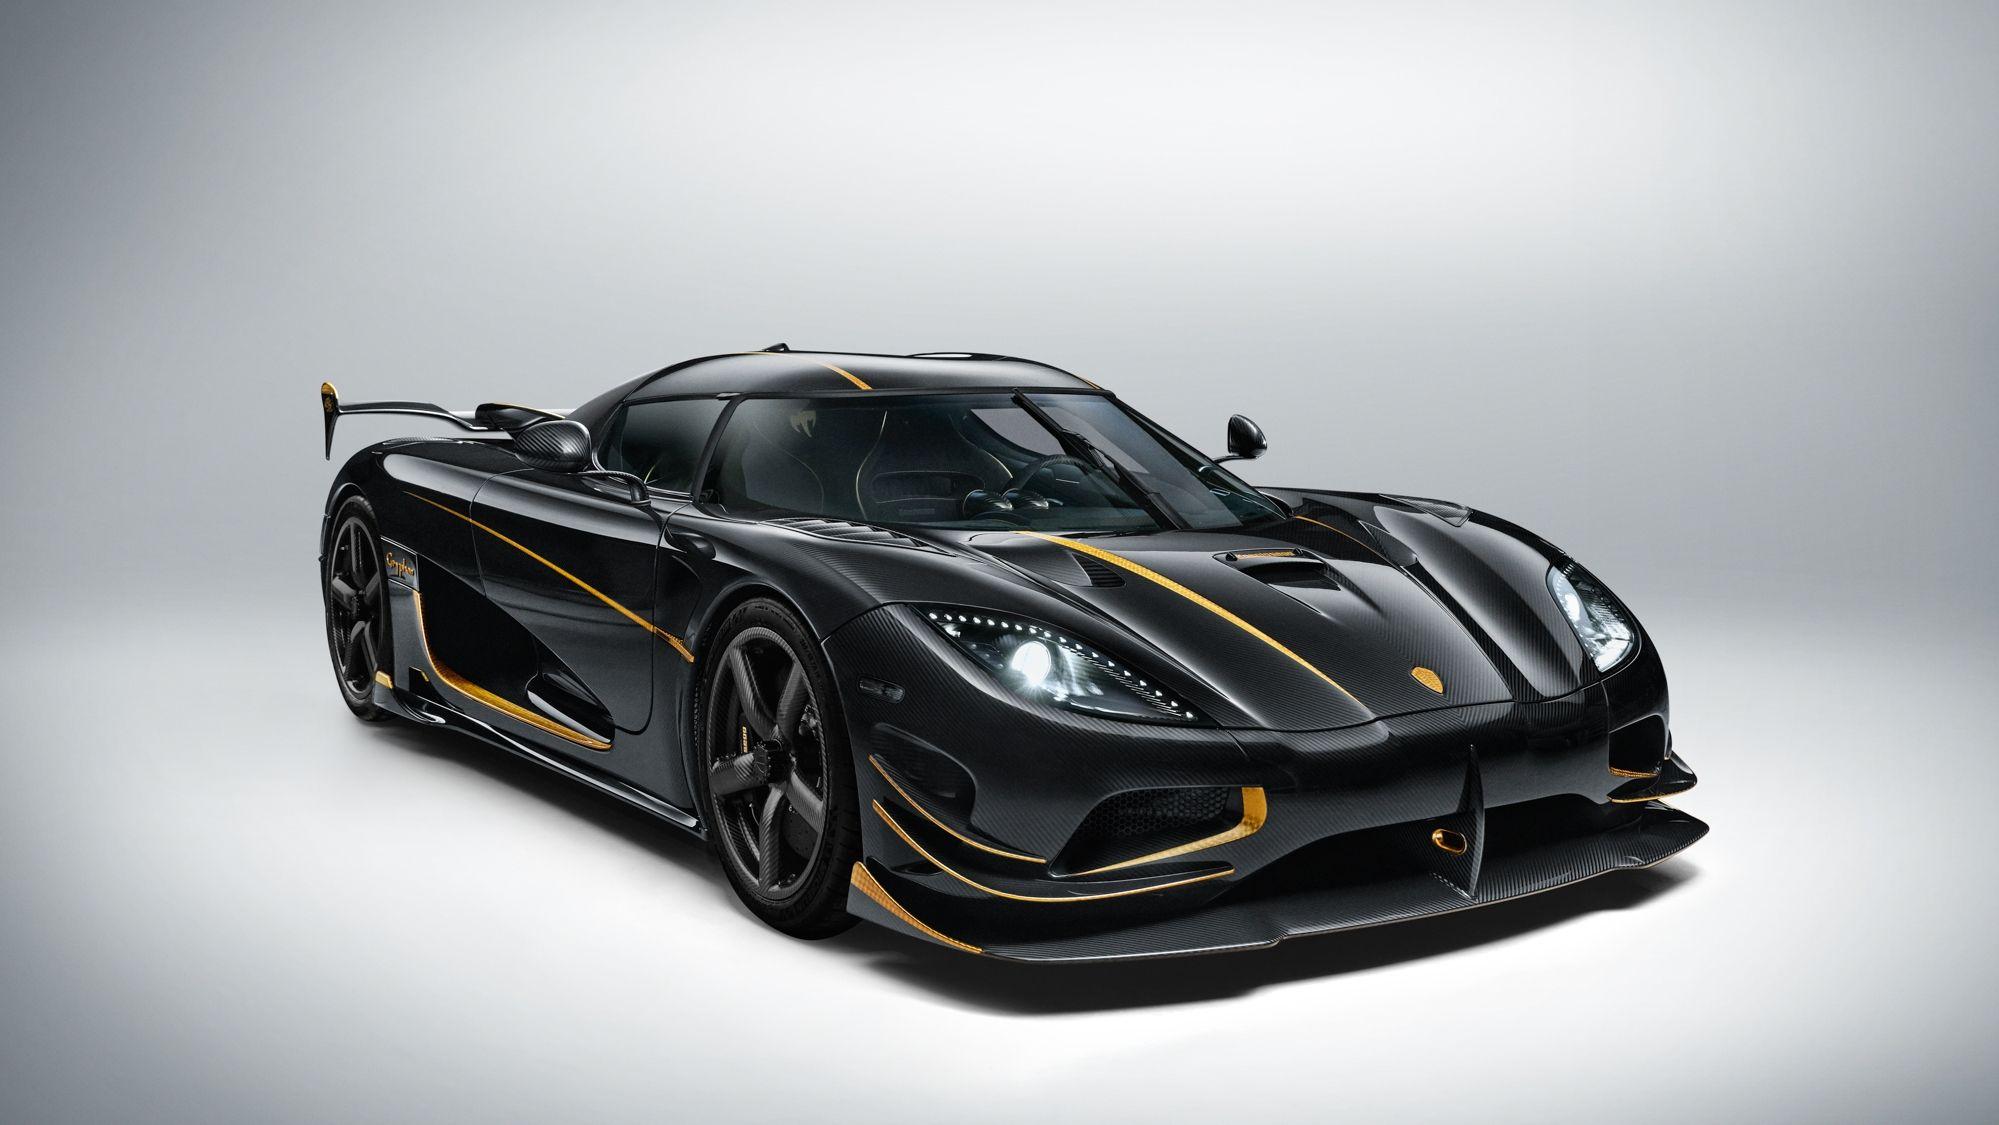 Koenigsegg Agera RS 'Gryphon' Picture, Photo, Wallpaper